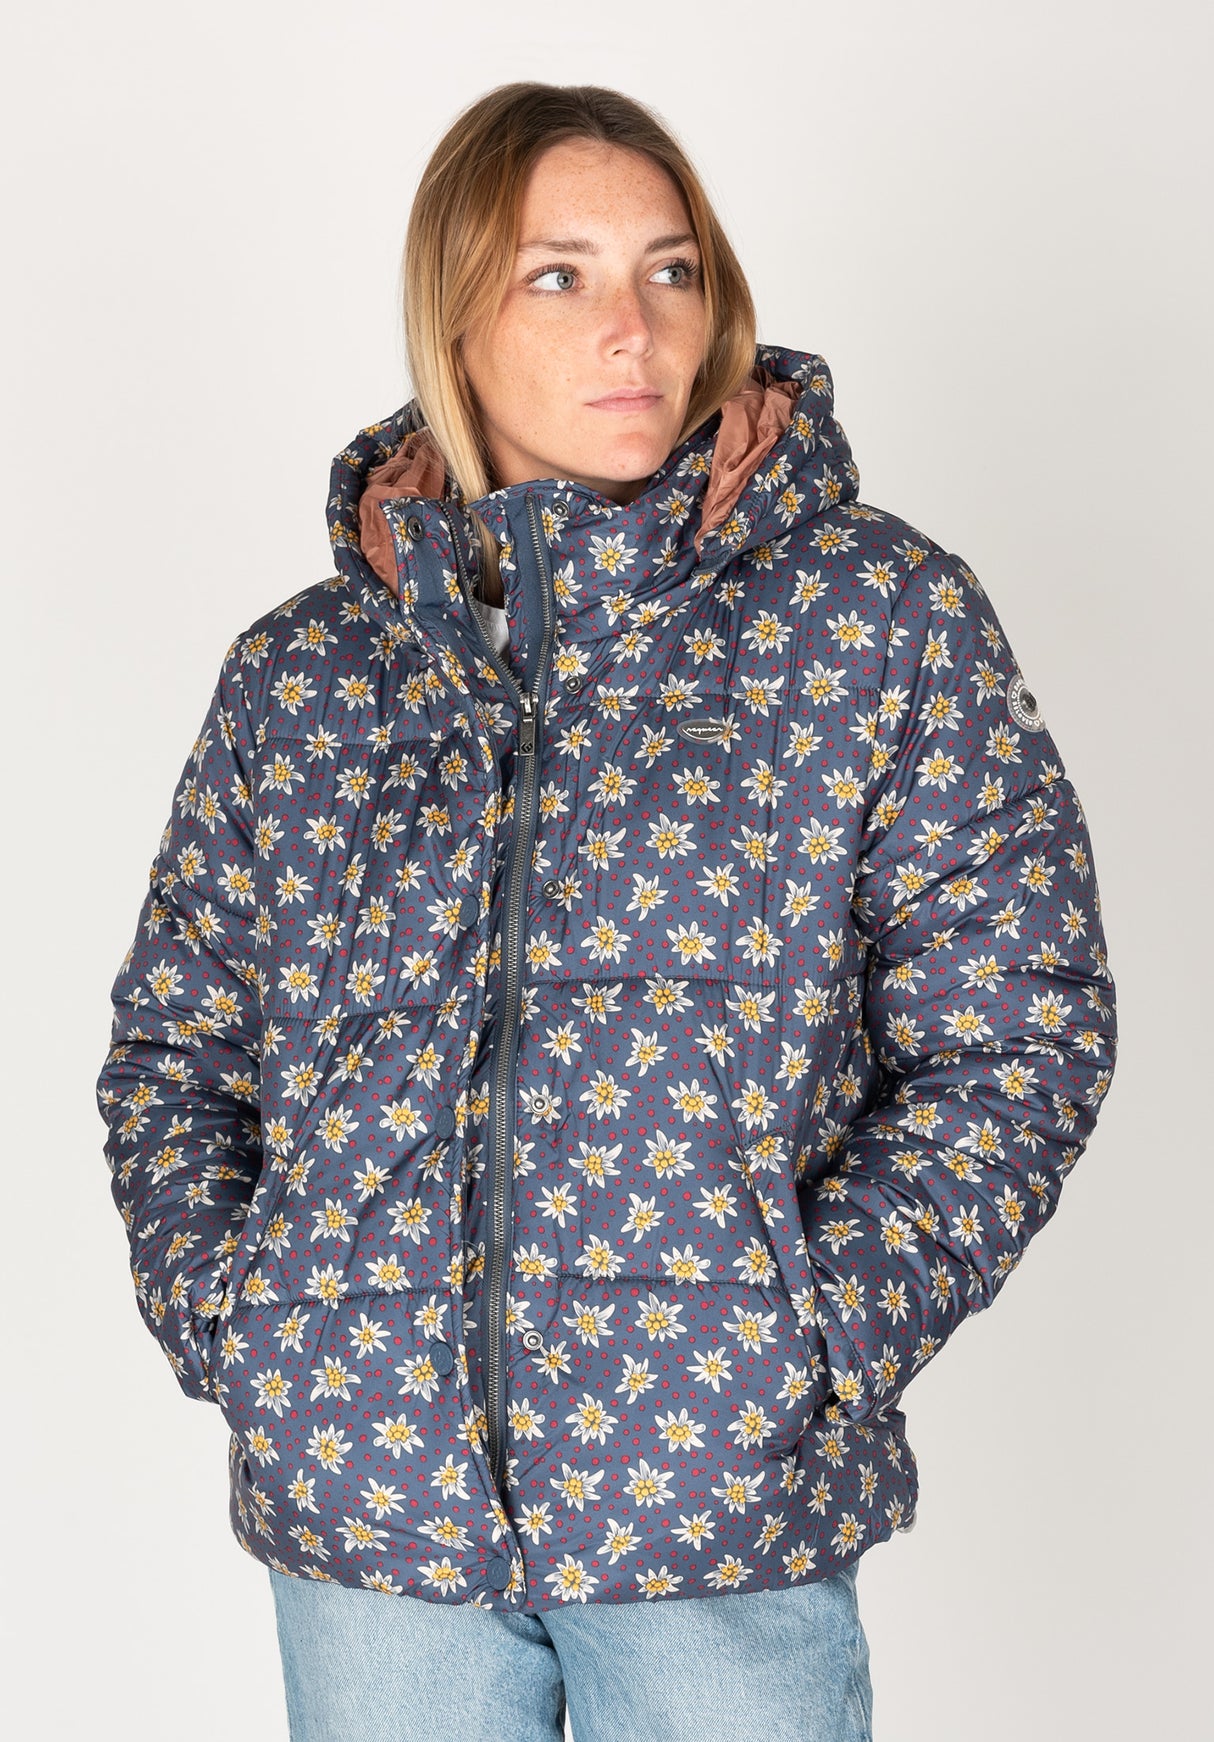 Relive Ragwear for blue Women Jackets in Winter TITUS –